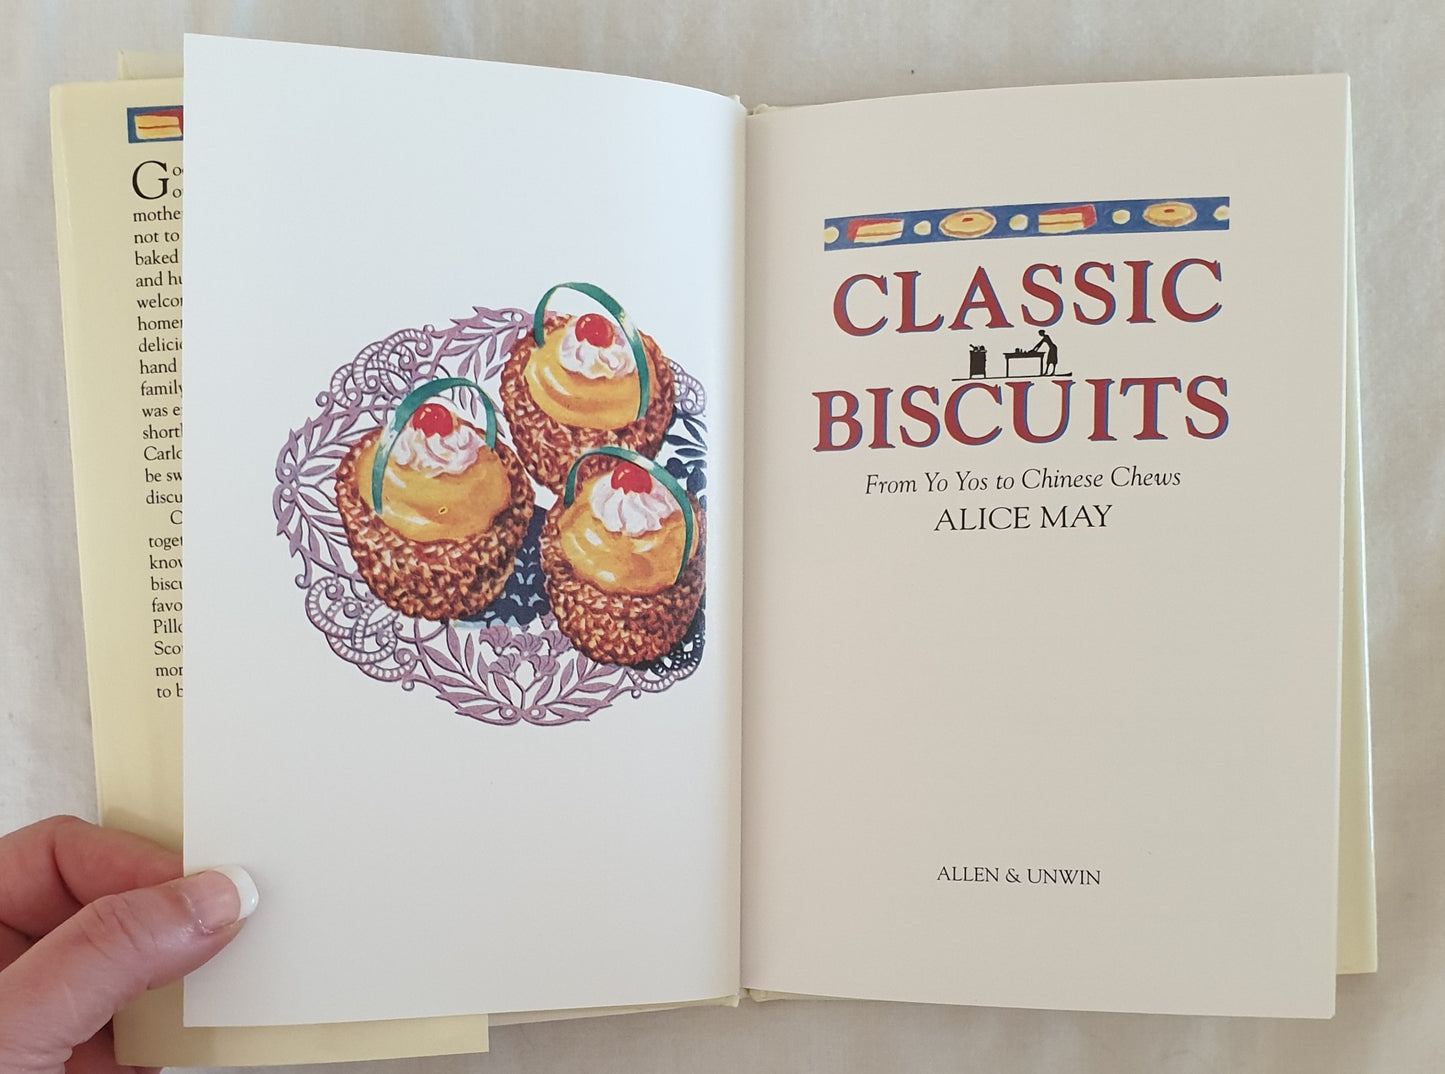 Classic Biscuits by Alice May